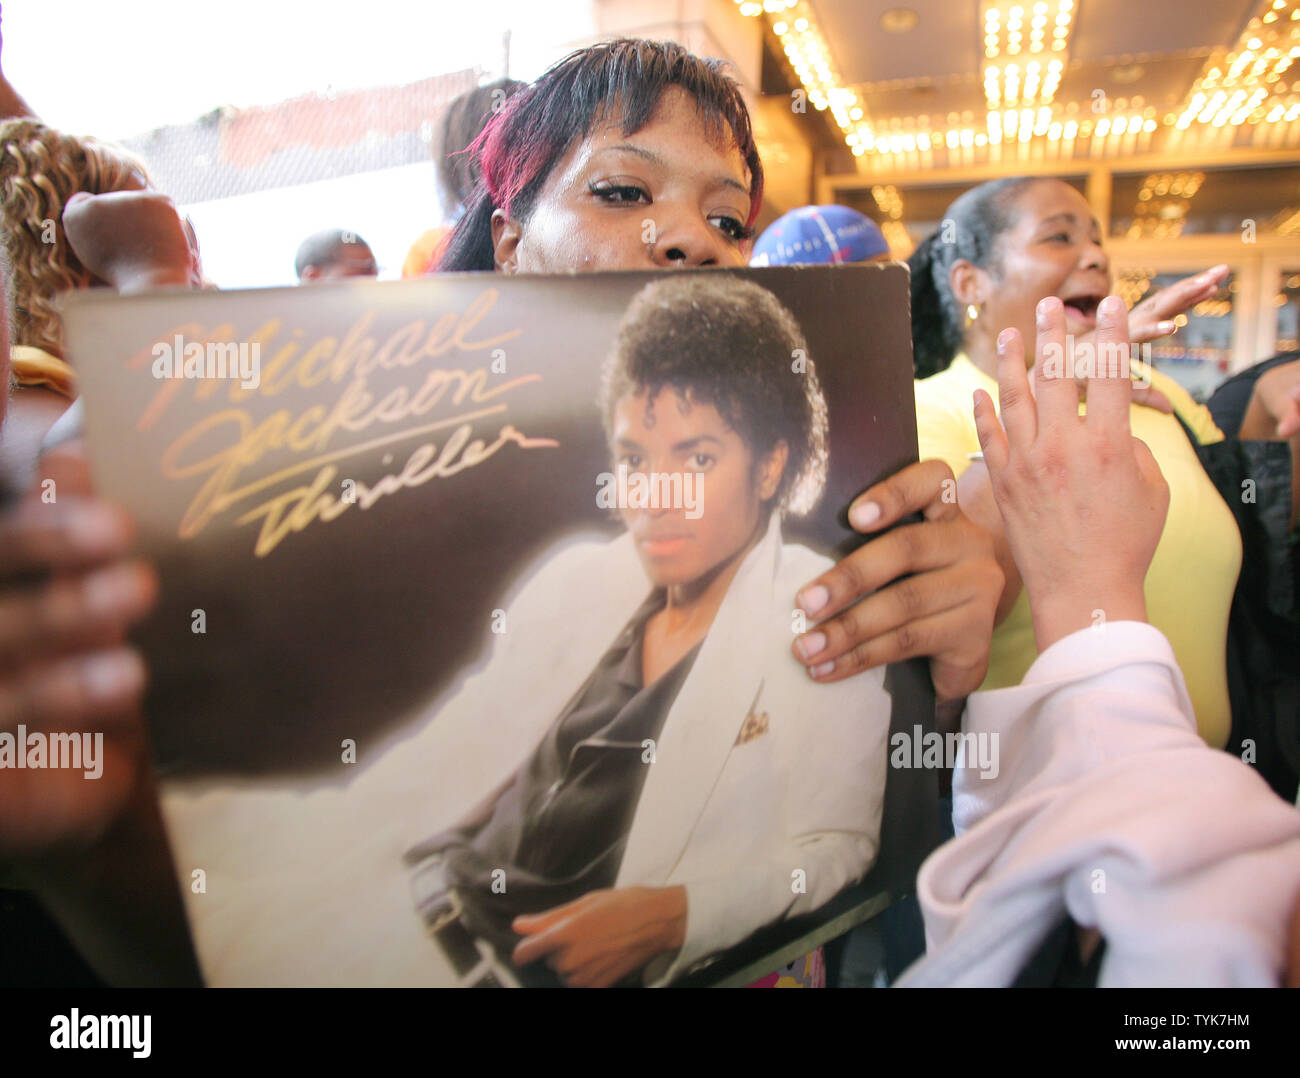 Shanaqua Donovich holds her copy of Michael Jackson's 'Thriller' album as fans gather at the Apollo to remember the pop singer on June 26, 2009 in New York. Jackson, who first performed at the theater at age 9, died the previous day from a heart attack. (UPI Photo/Monika Graff) Stock Photo